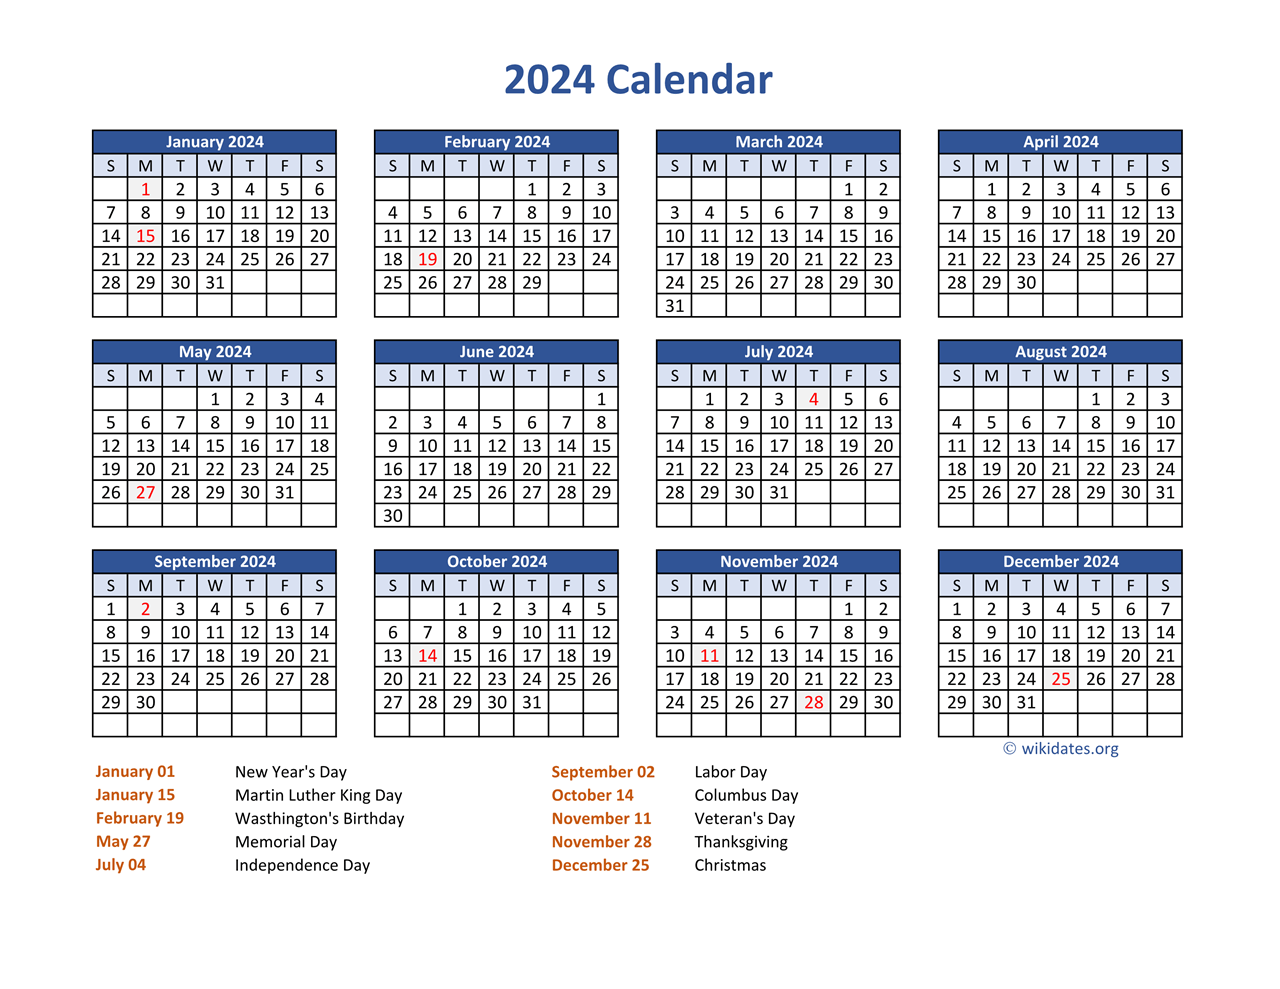 Pdf Calendar 2024 With Federal Holidays | Wikidates for 2024 Yearly Calendar With Holidays Printable